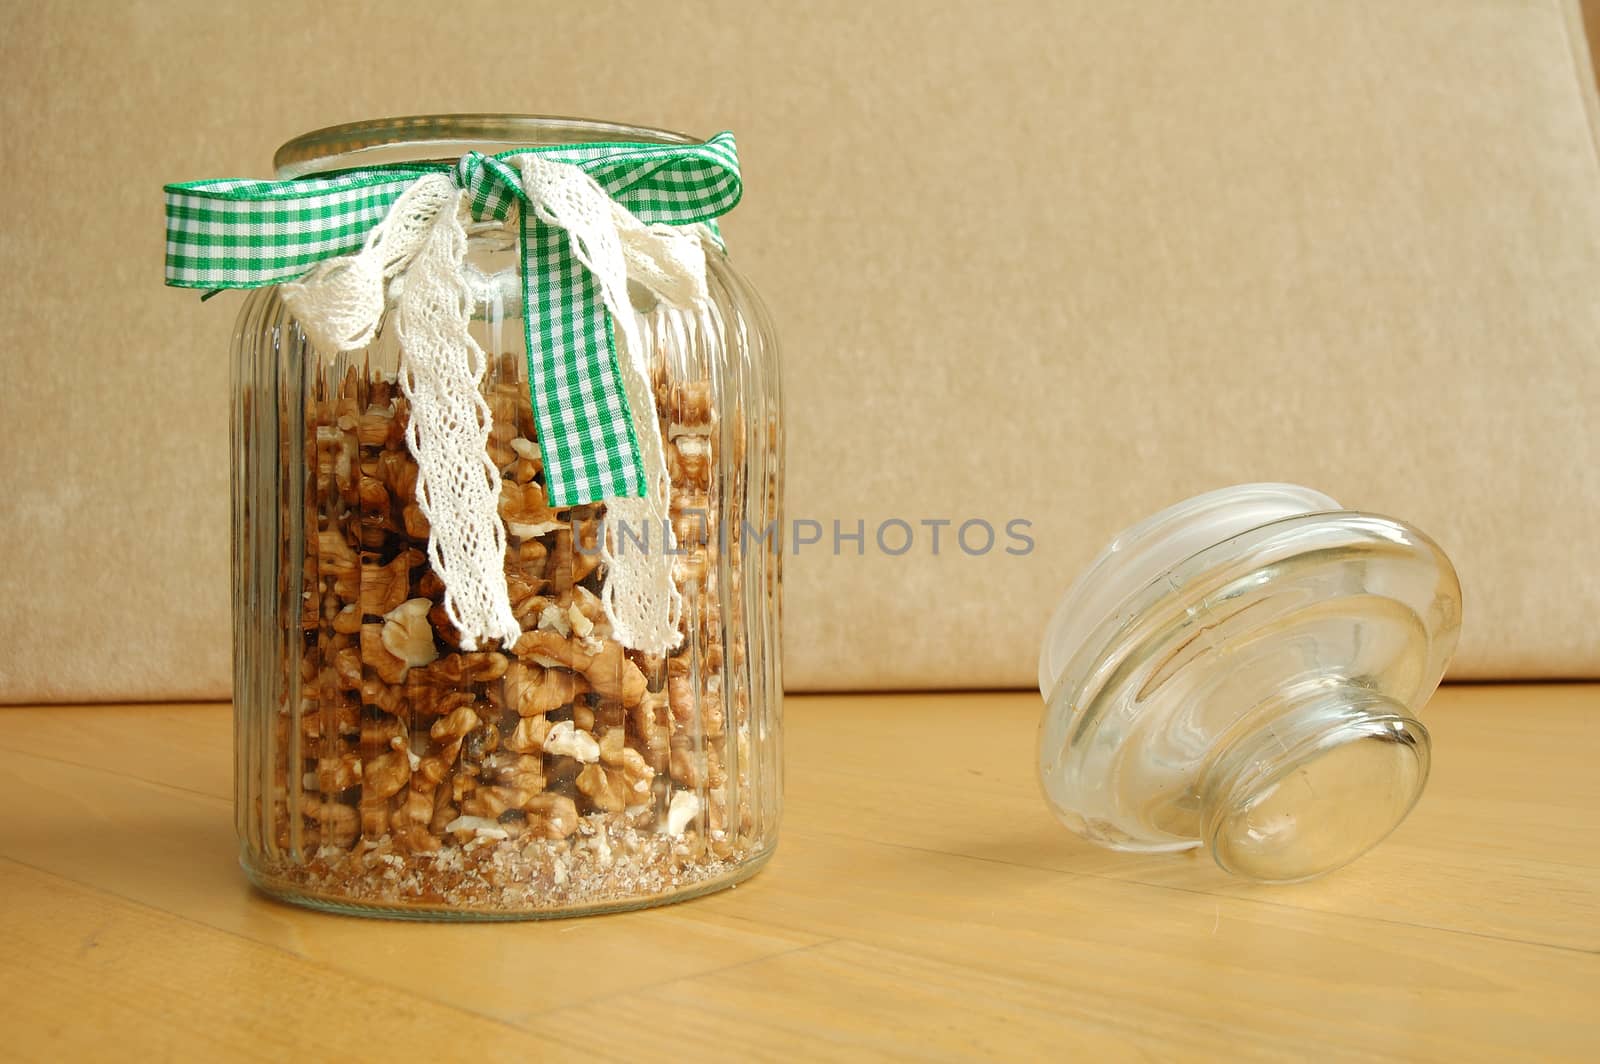 Glass jar with band full of cracked walnuts